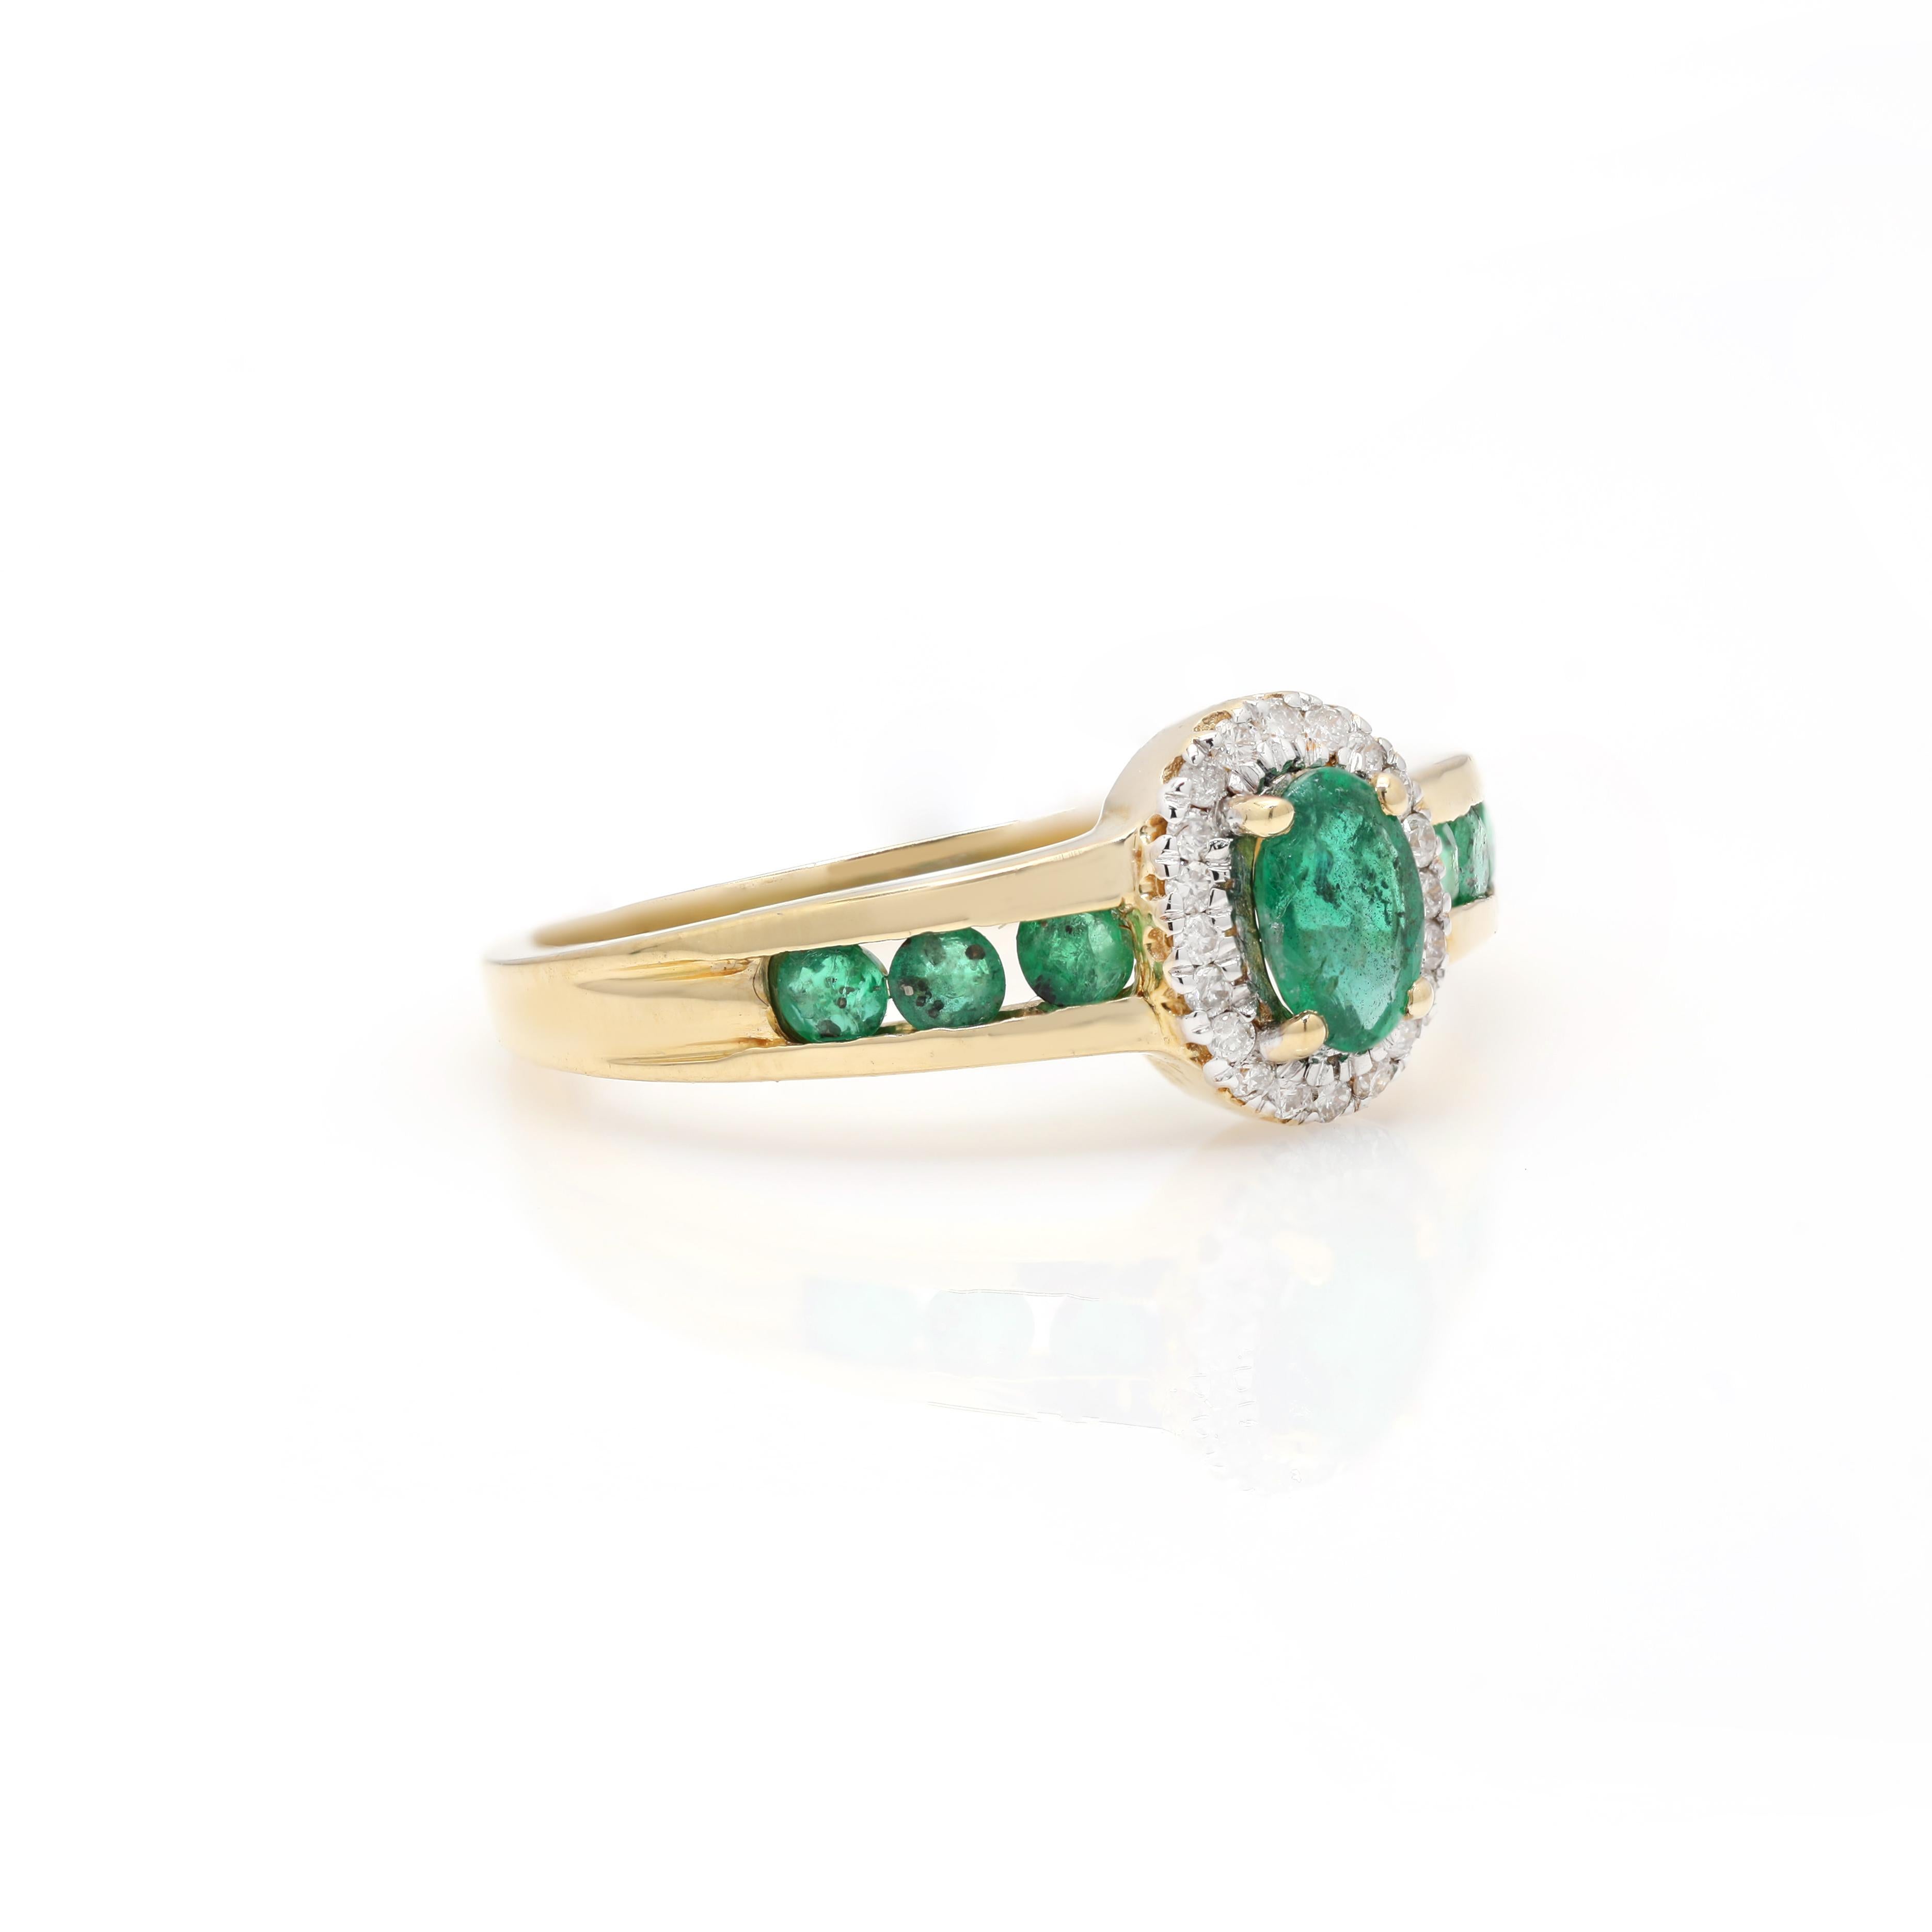 For Sale:  Emerald Engagement Ring with Halo Diamond Set in 14K Solid Yellow Gold 2